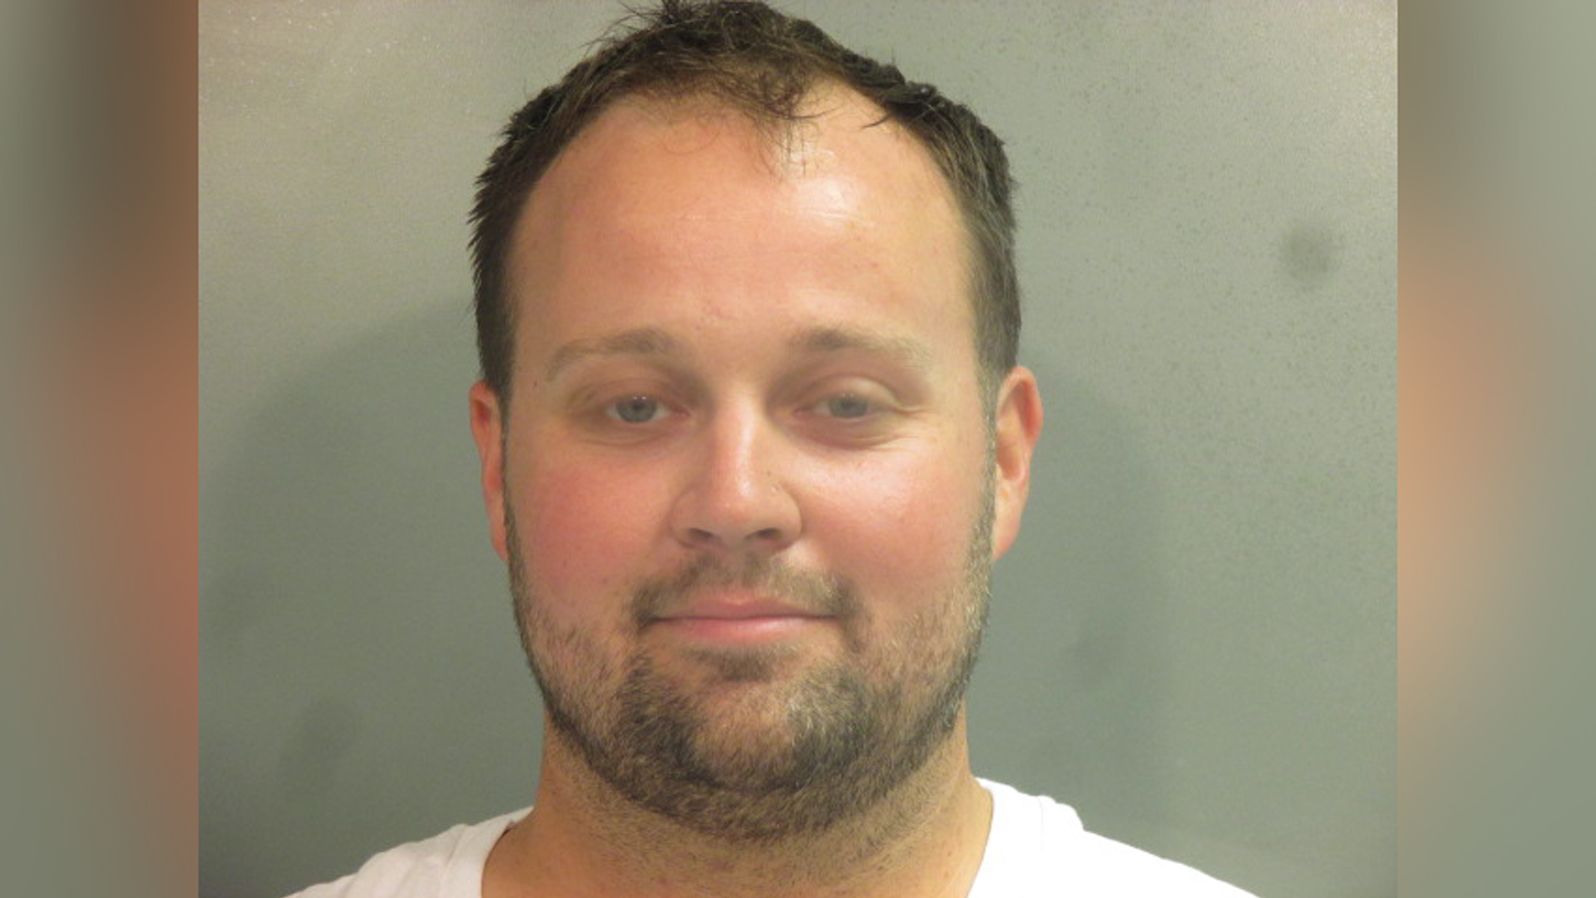 Josh Duggar is seen in this booking photo following his arrest in Arkansas on Thursday, April 29, 2021.